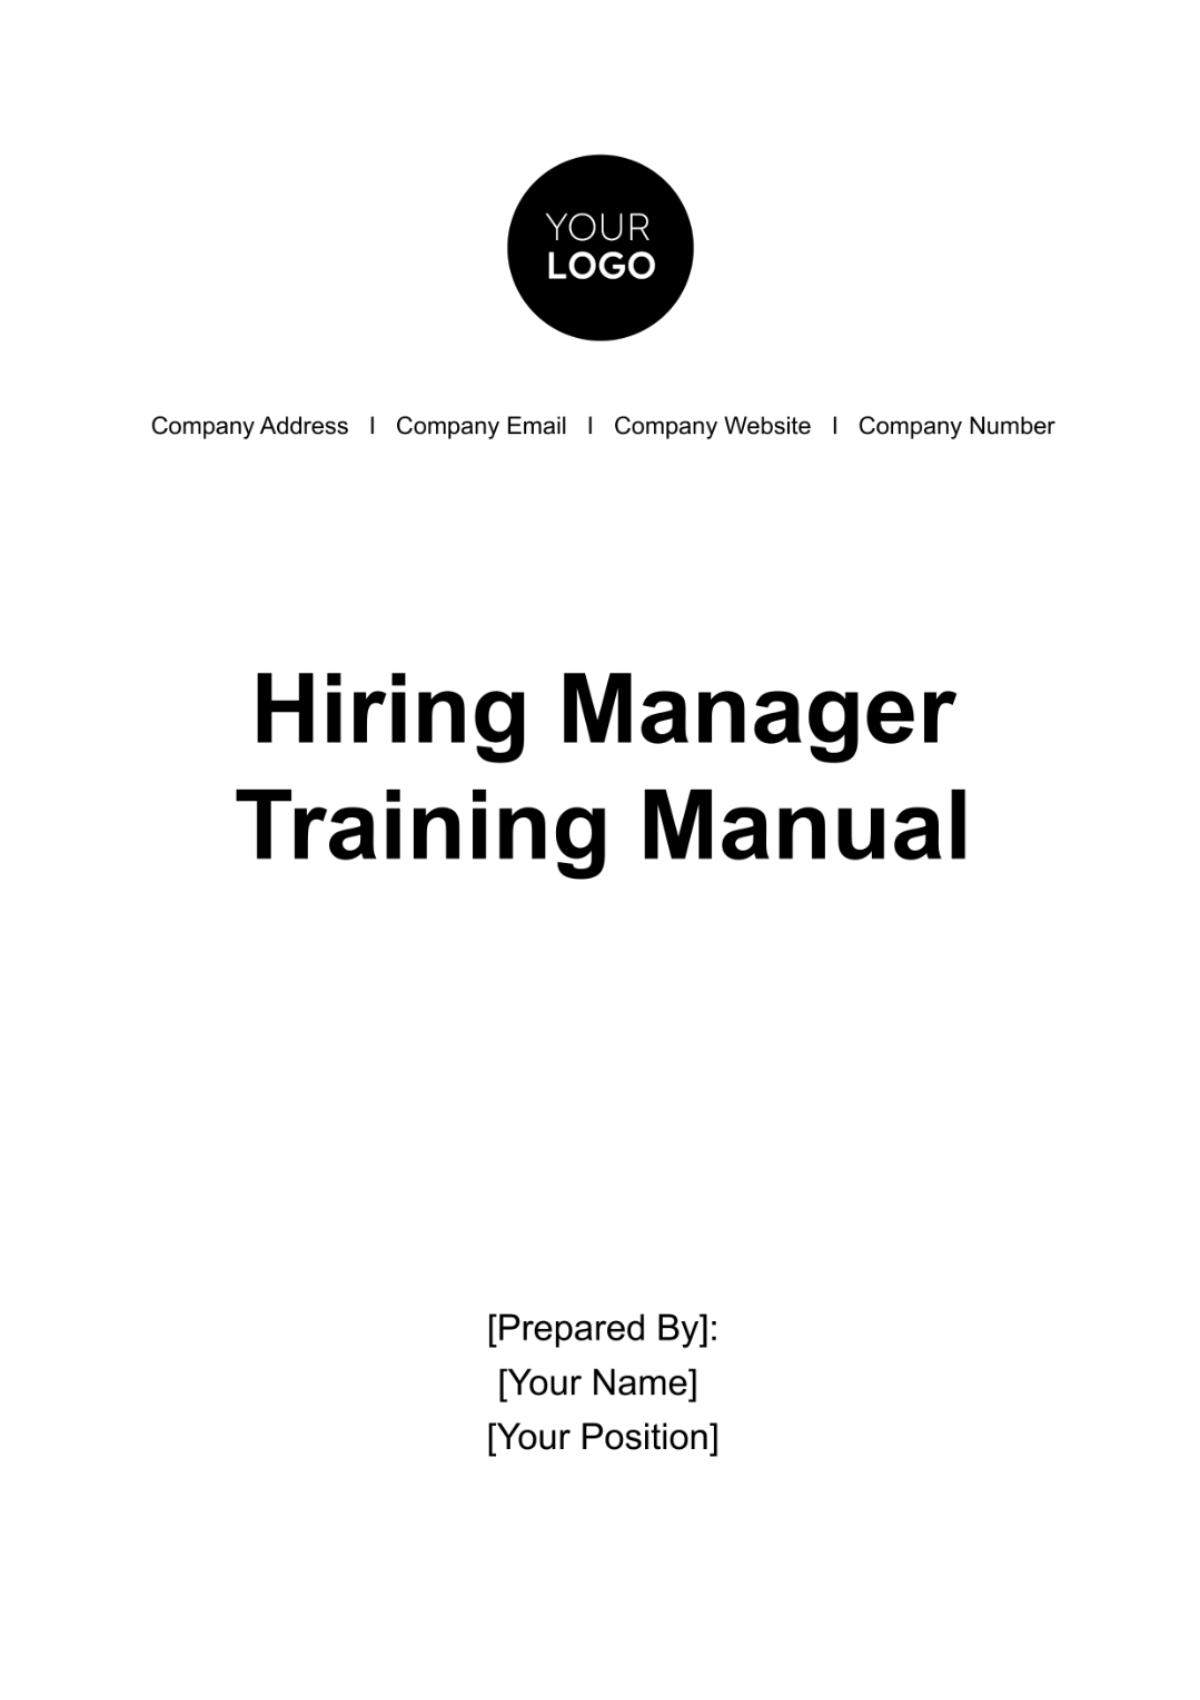 Free Hiring Manager Training Manual HR Template